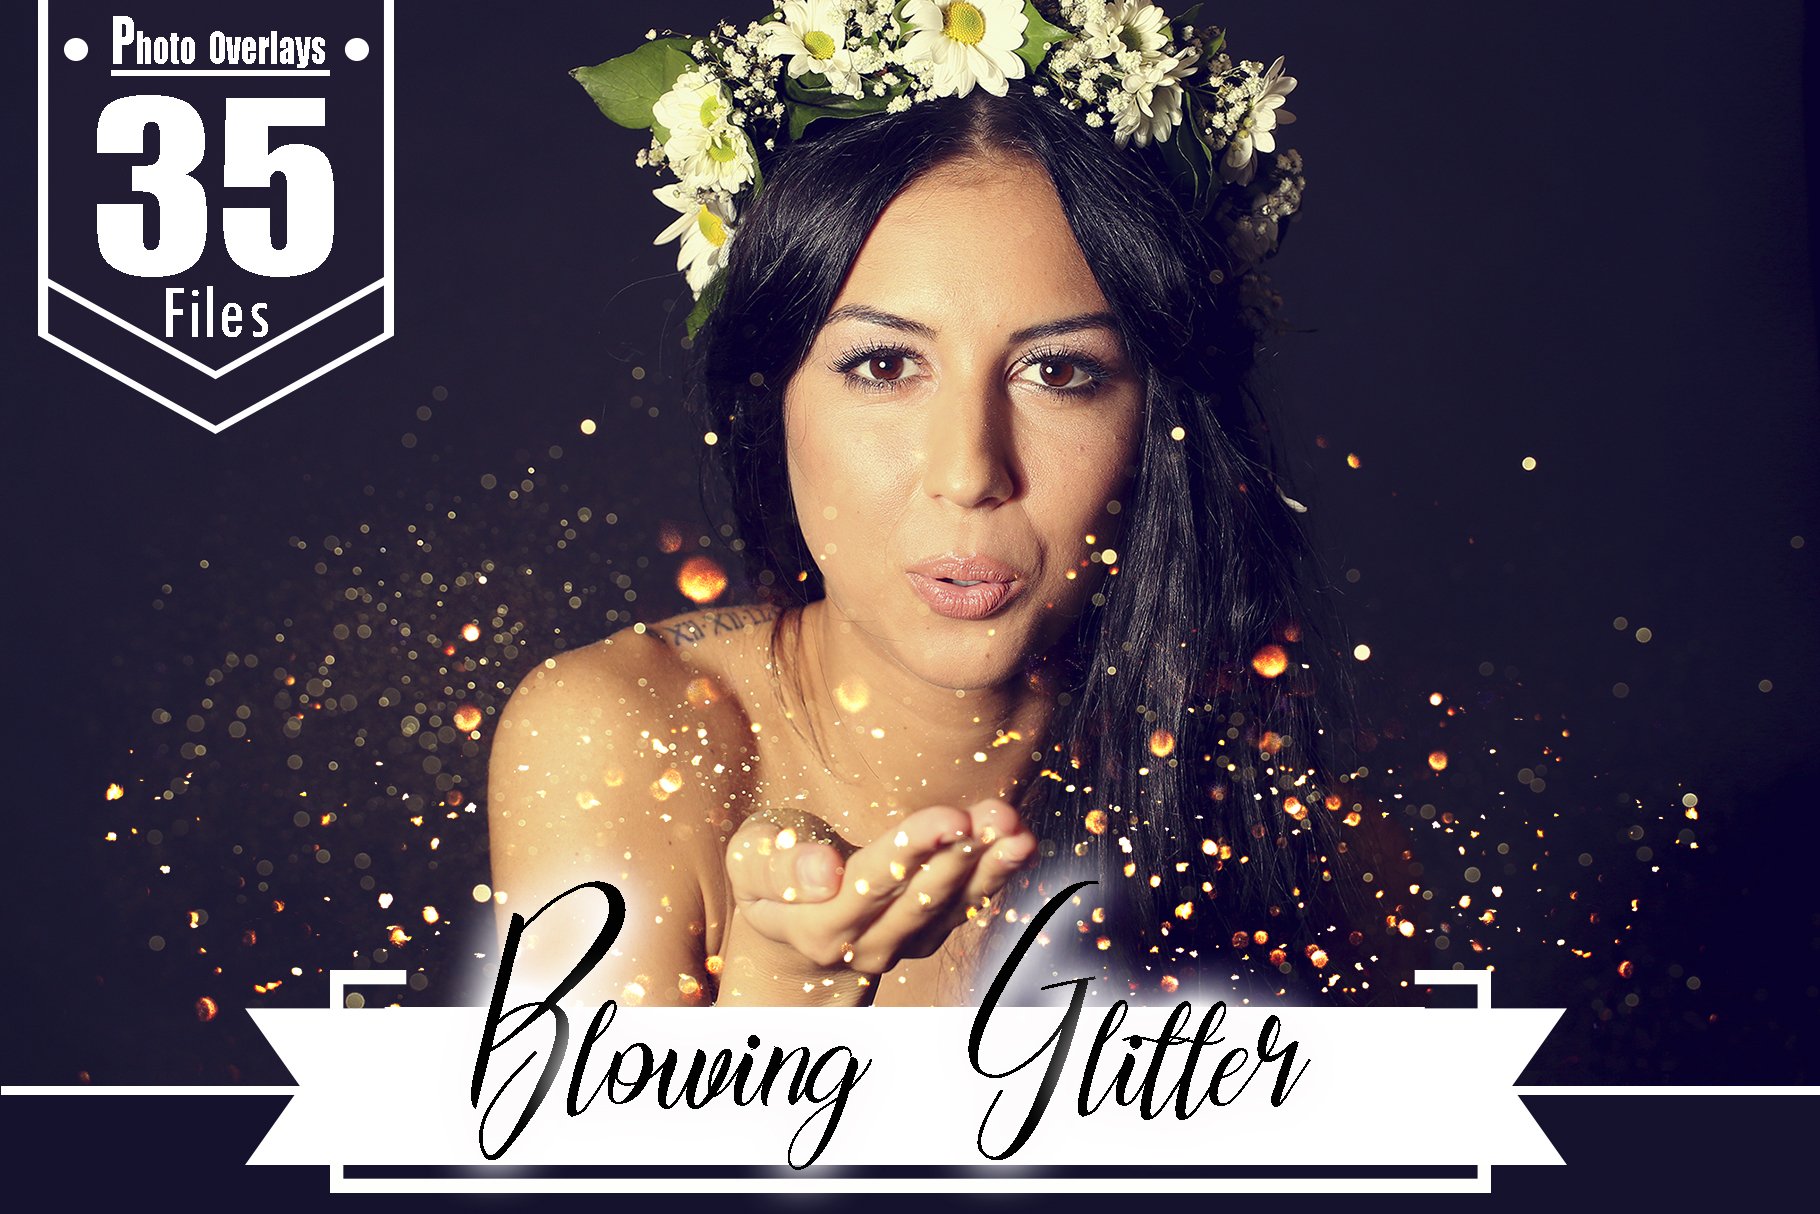 35 Blowing glitter Photoshop overlaycover image.